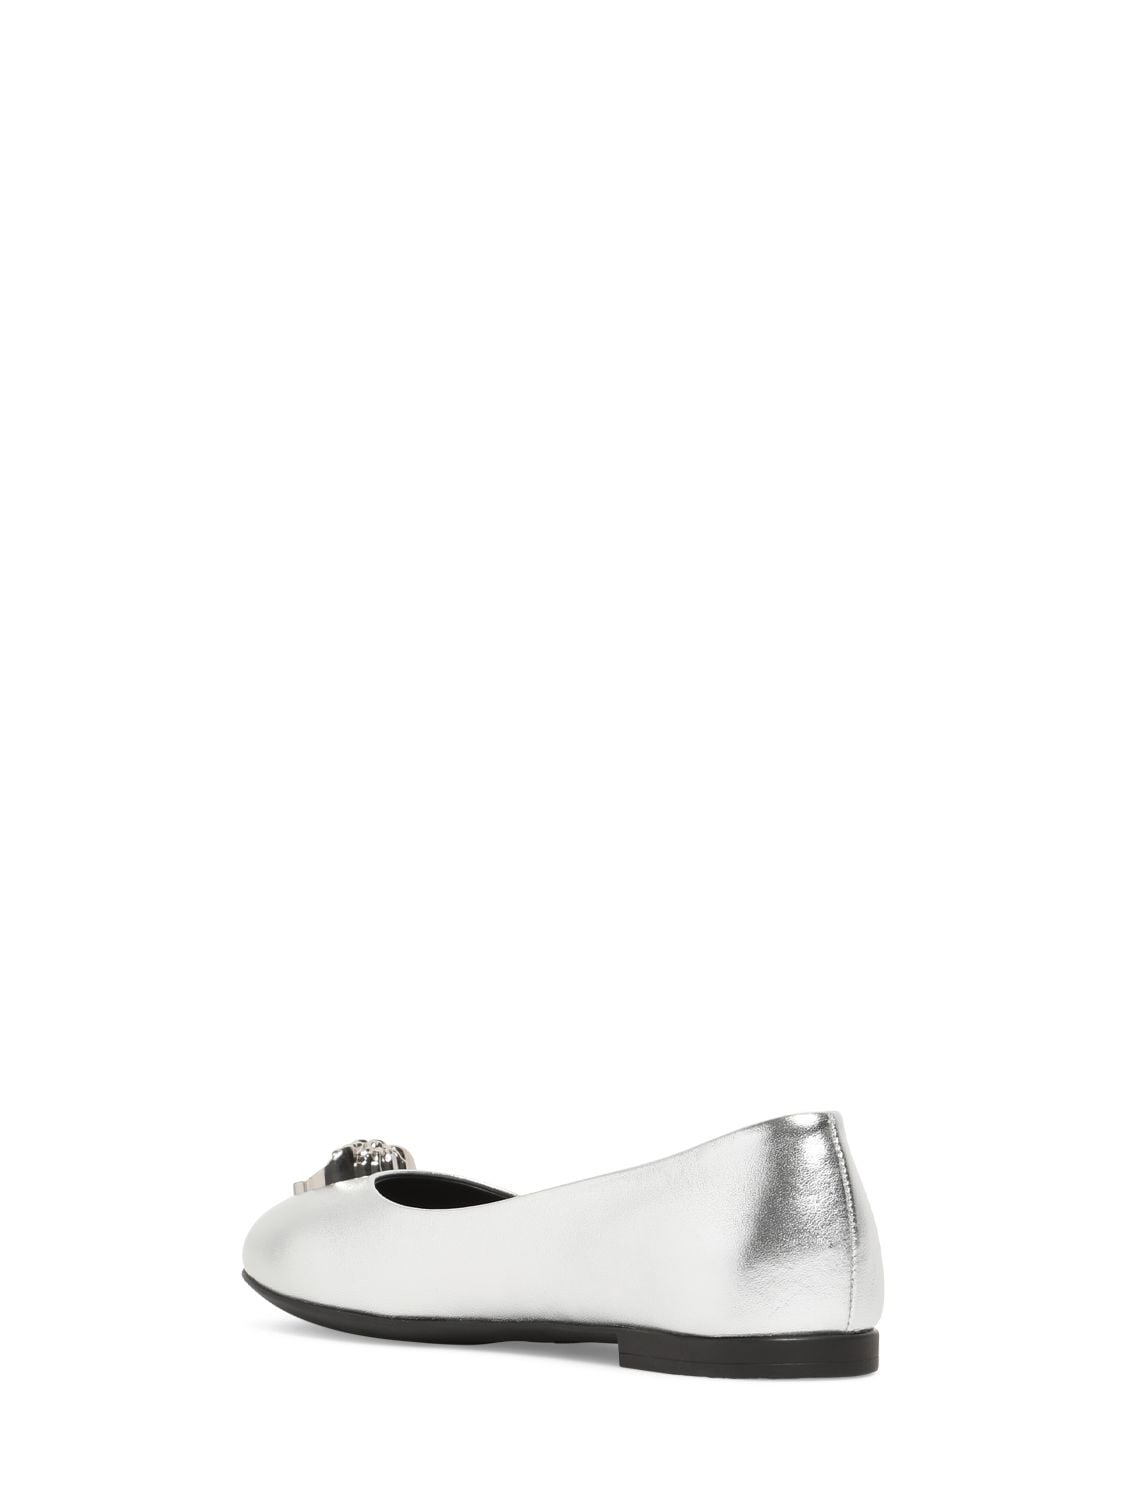 Shop Versace Laminated Leather Ballerinas W/ Medusa In Silver